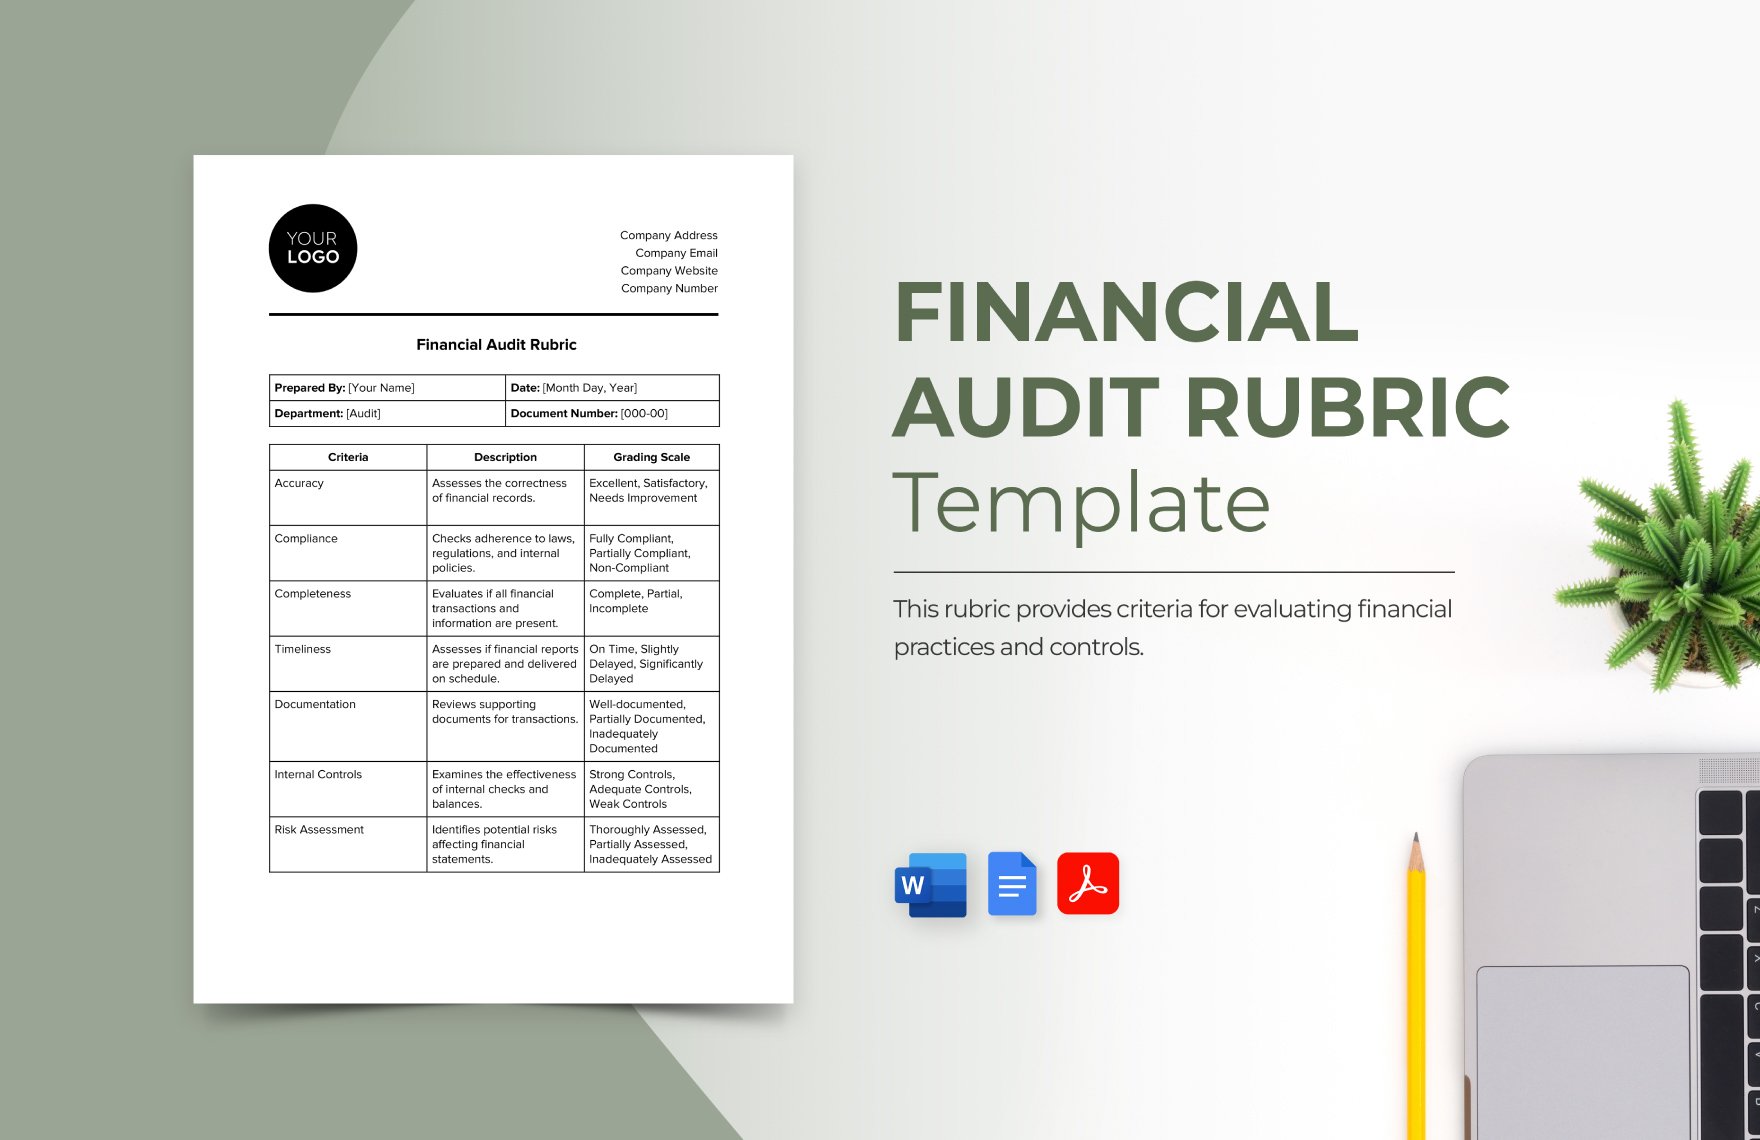 Financial Audit Rubric Template